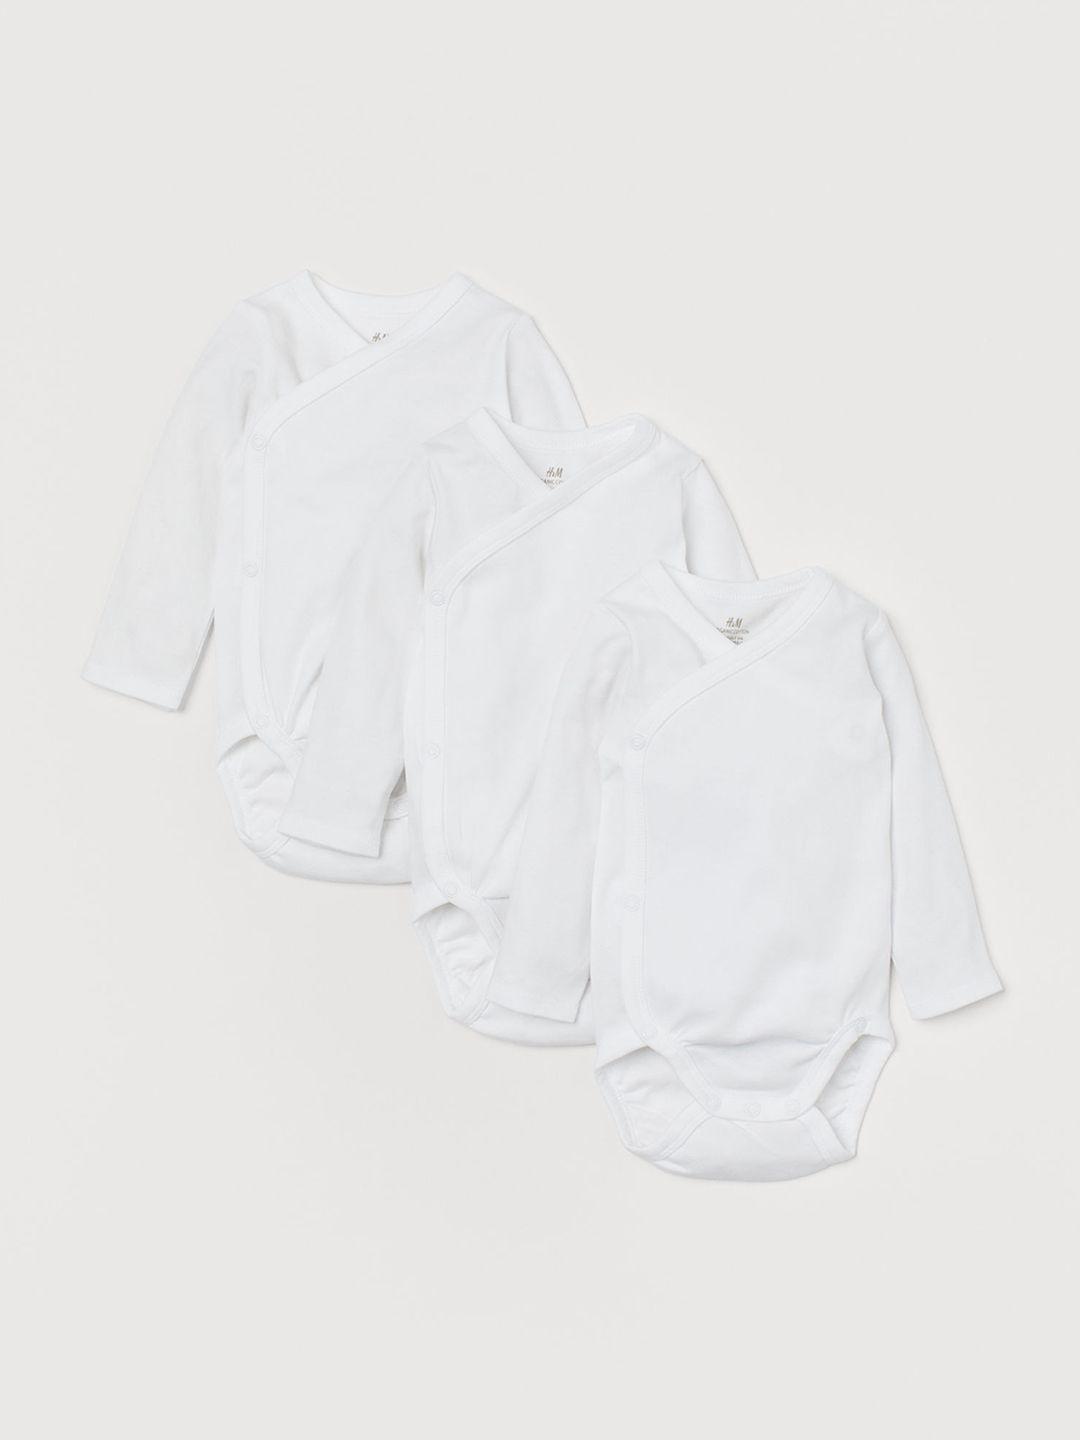 H&M Girls White Solid 3 Pack Long-Sleeved Sustainable Rompers